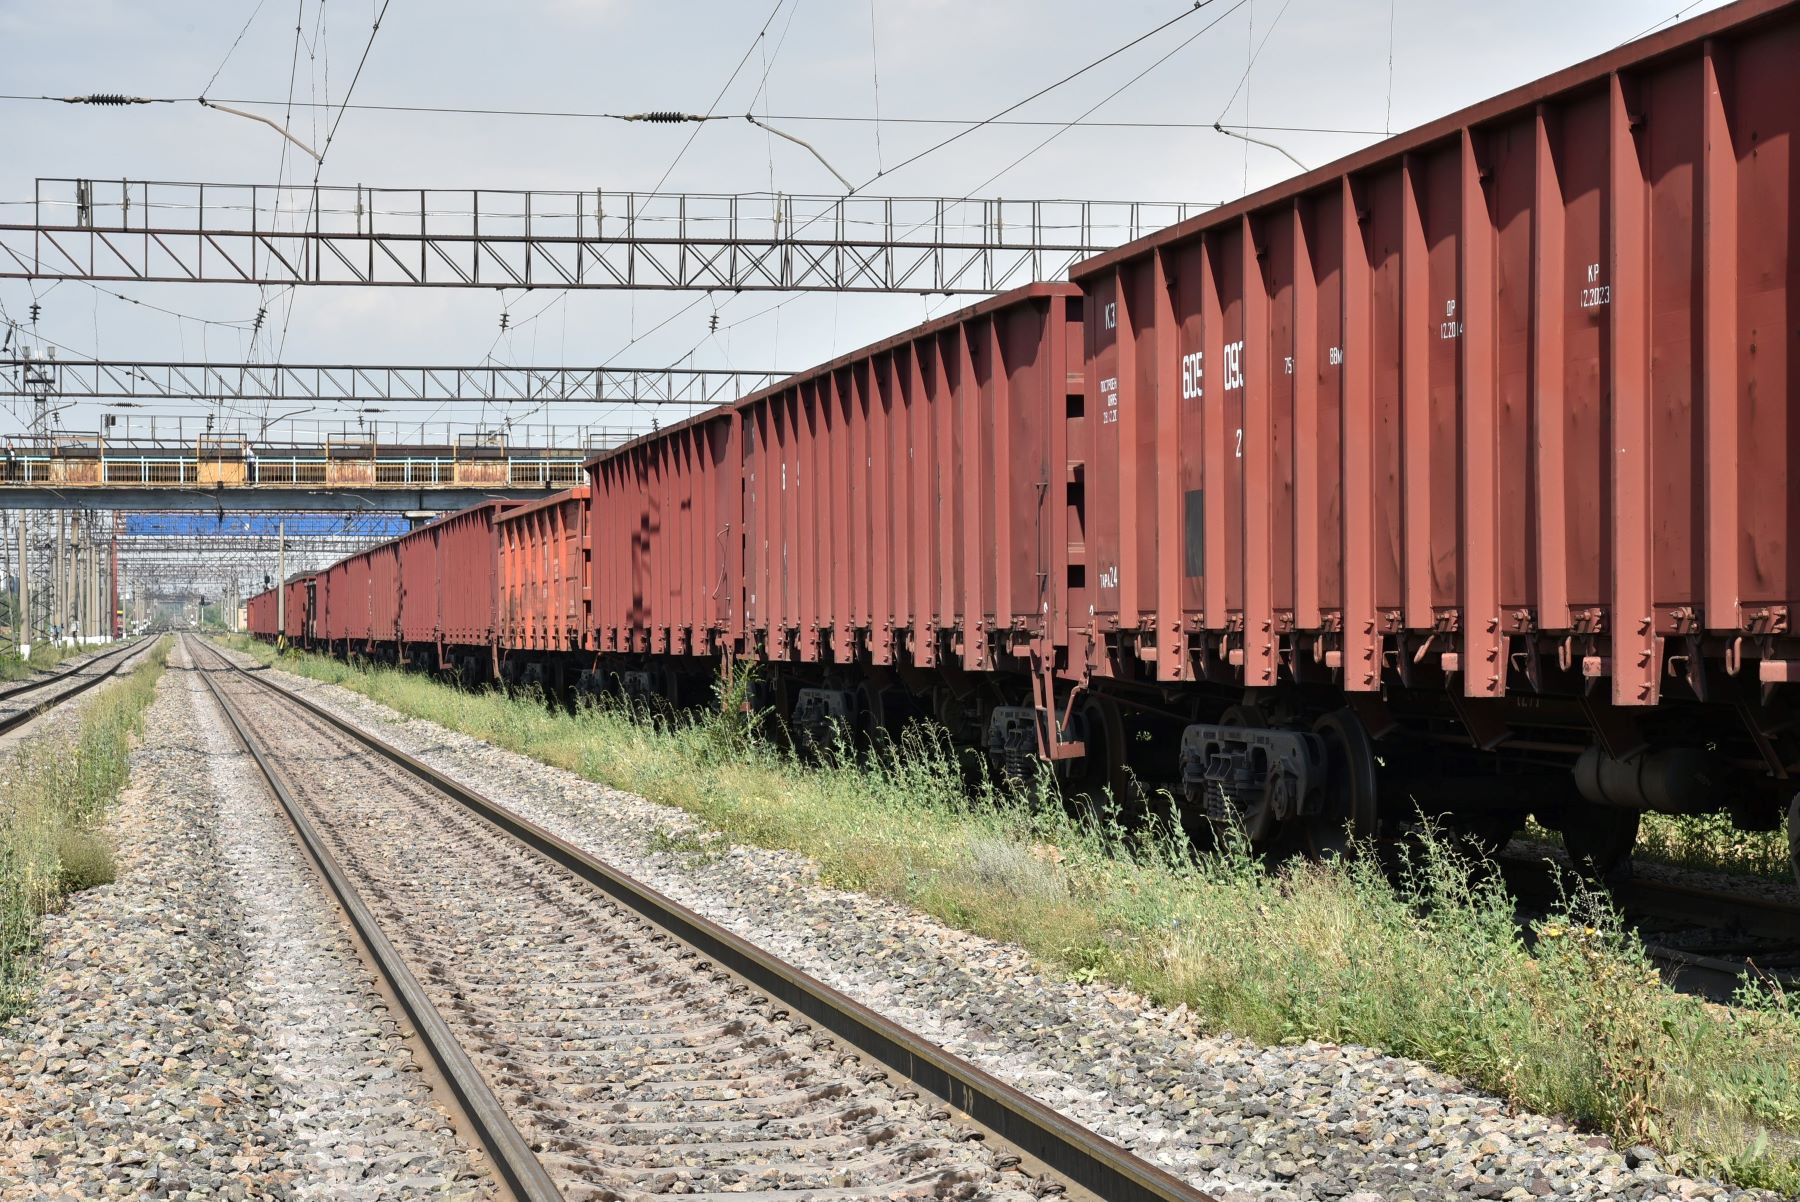 Kaztemirtrans JSC has repaired more than 3 thousand freight cars since the beginning of the year